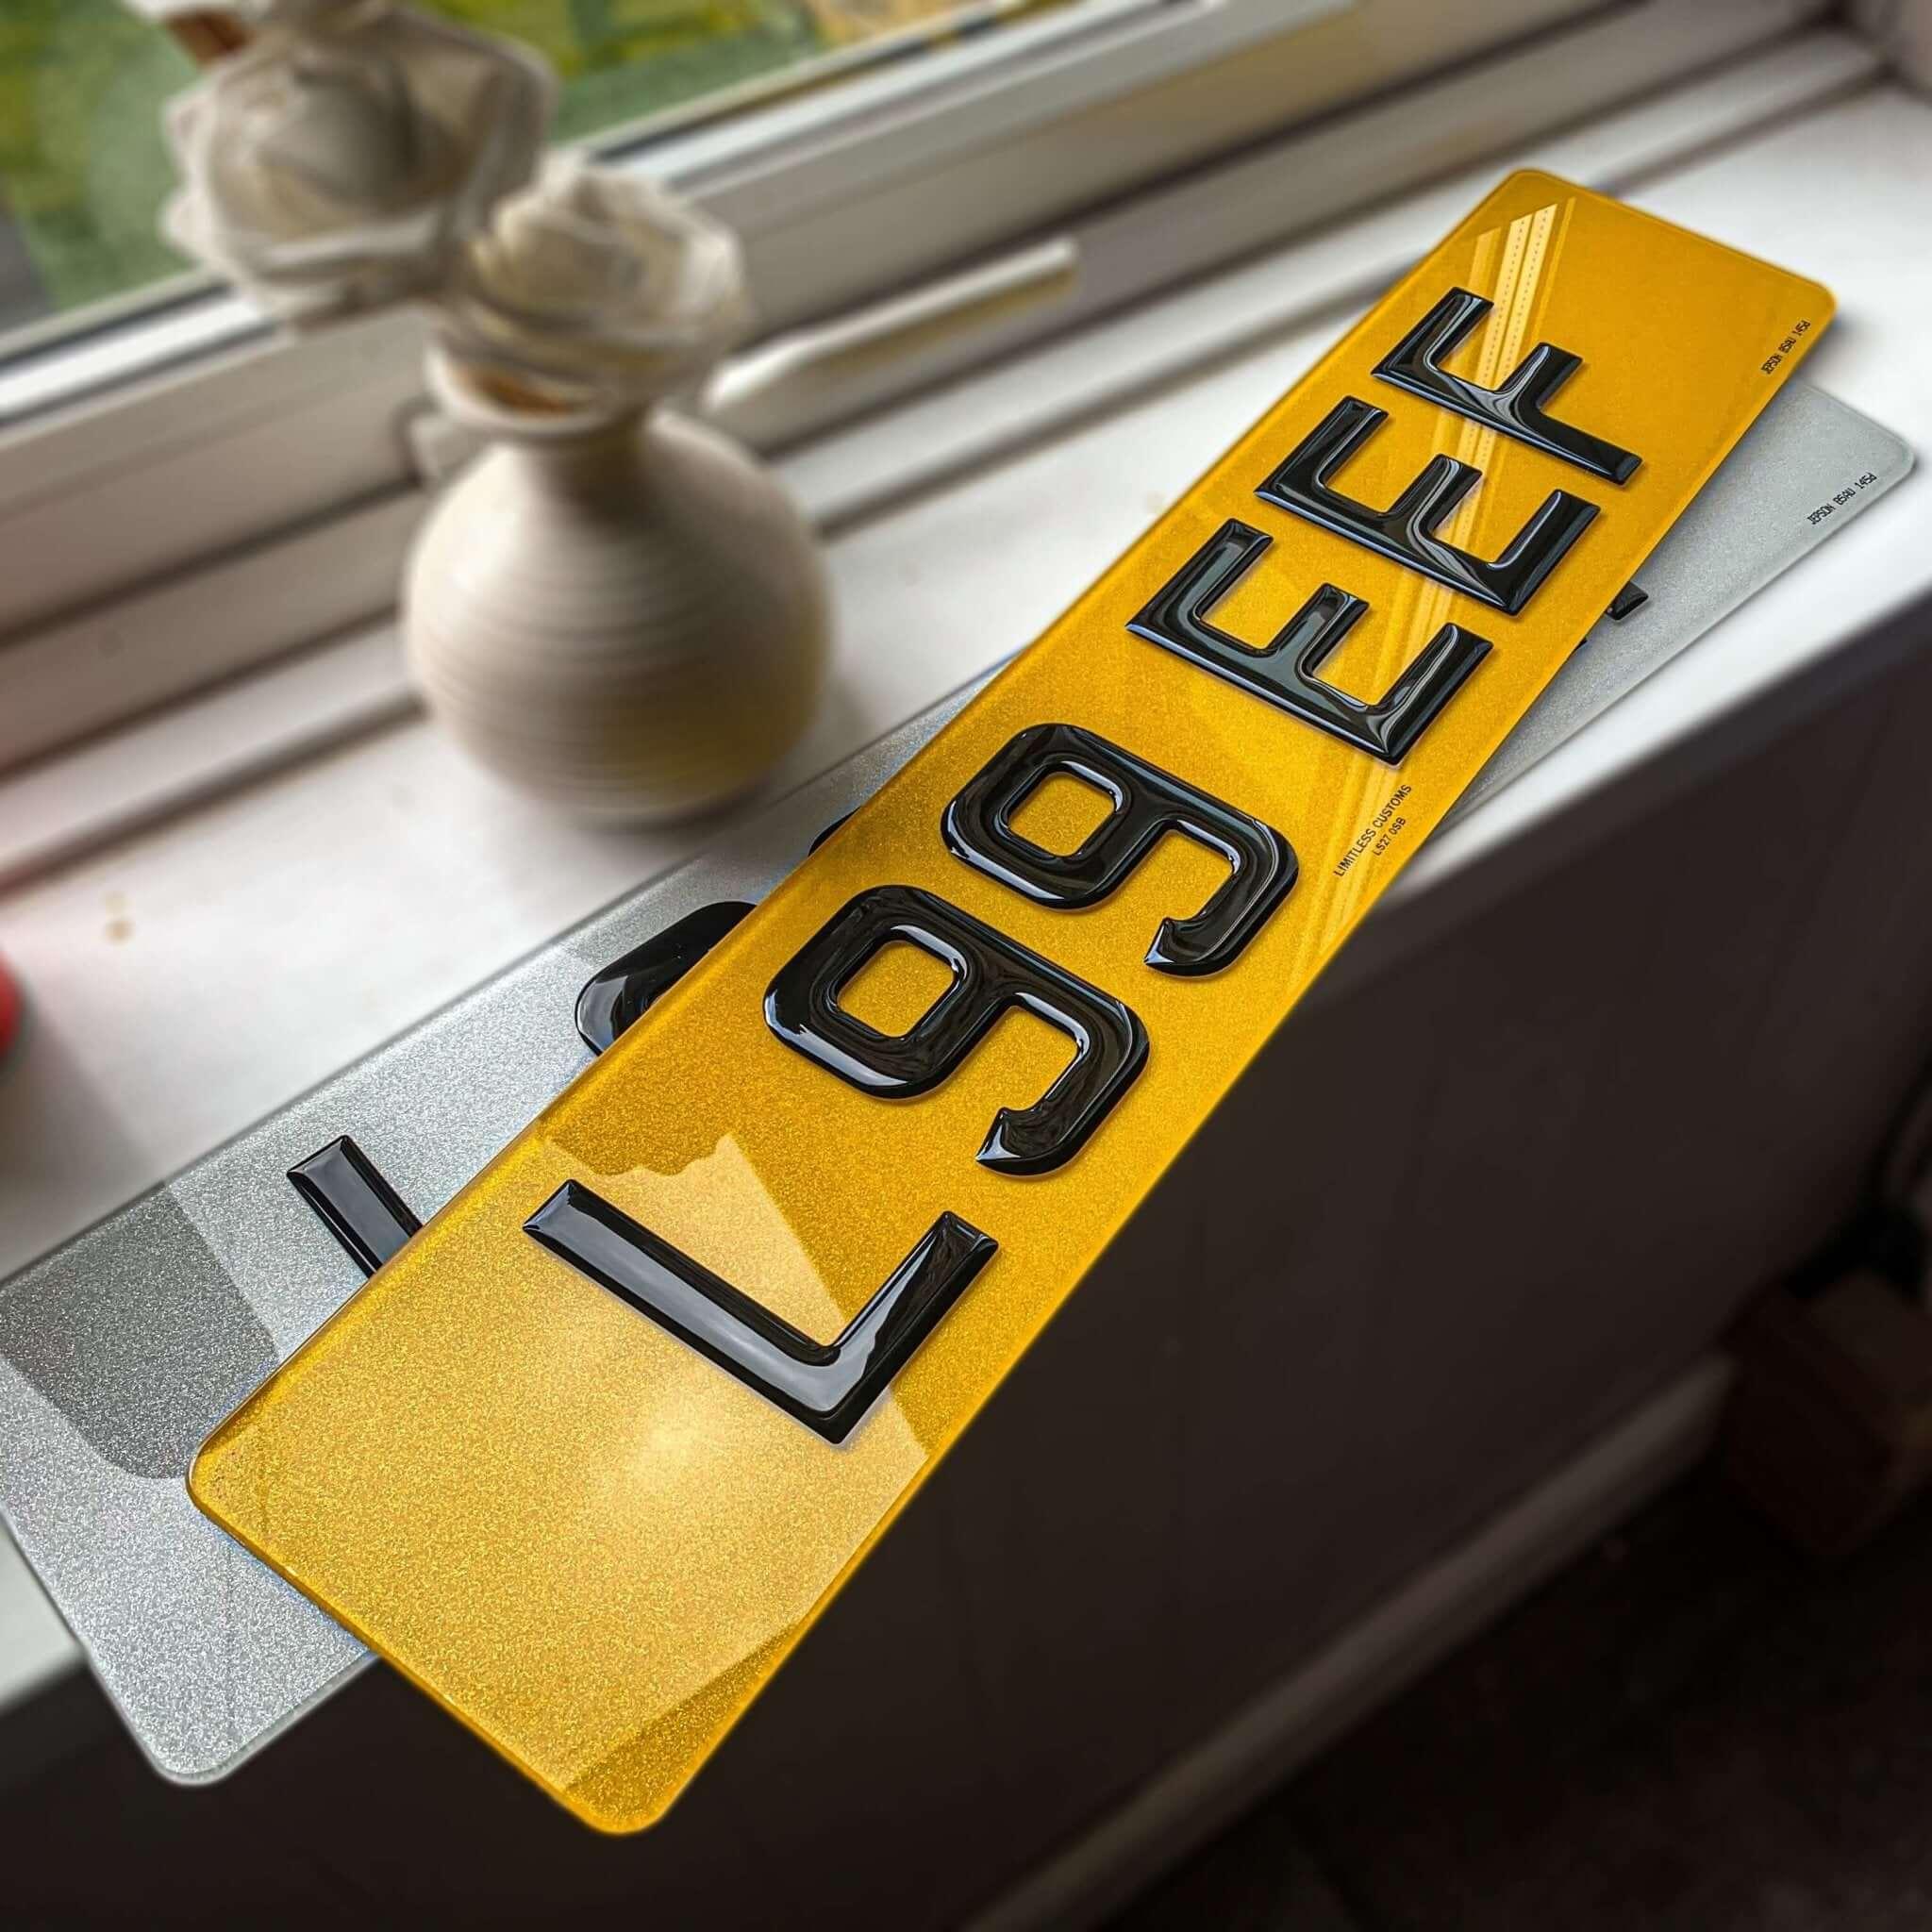 3D Gel Number Plates - Limitless Plates: 3D + 4D Number Plate Specialists